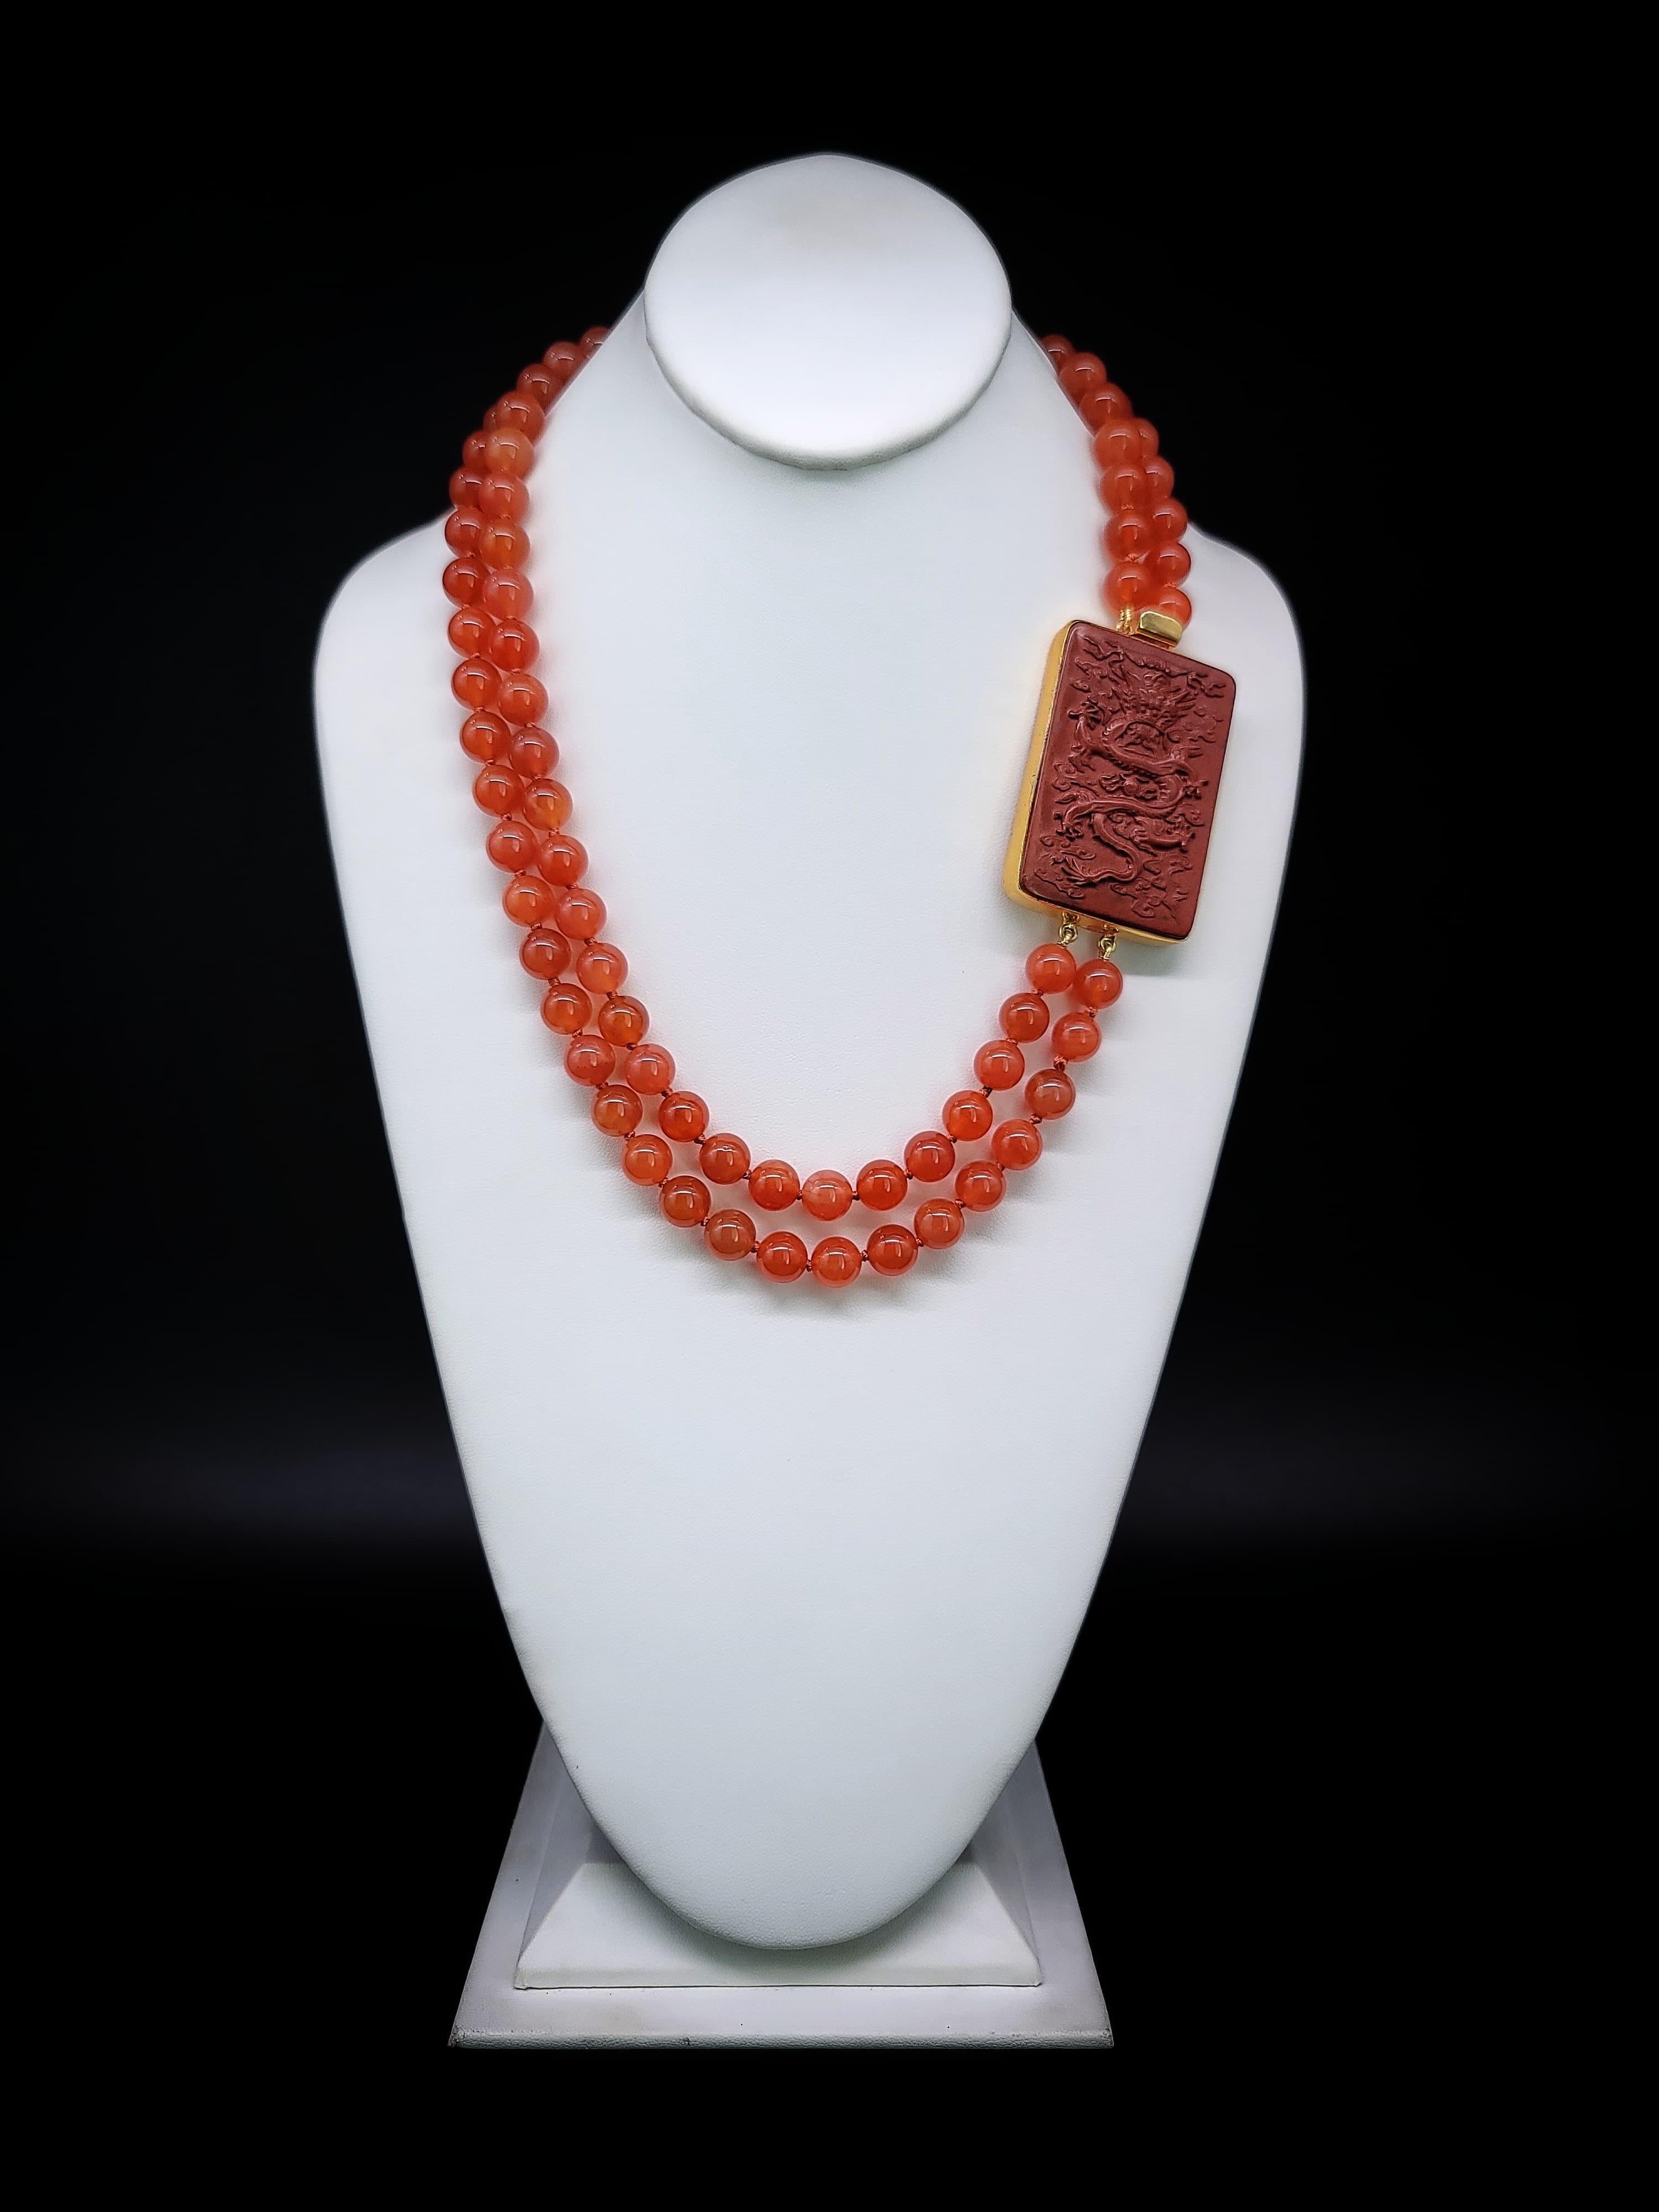 A.Jeschel Polished Chalcedony beads necklace with a signature clasp. For Sale